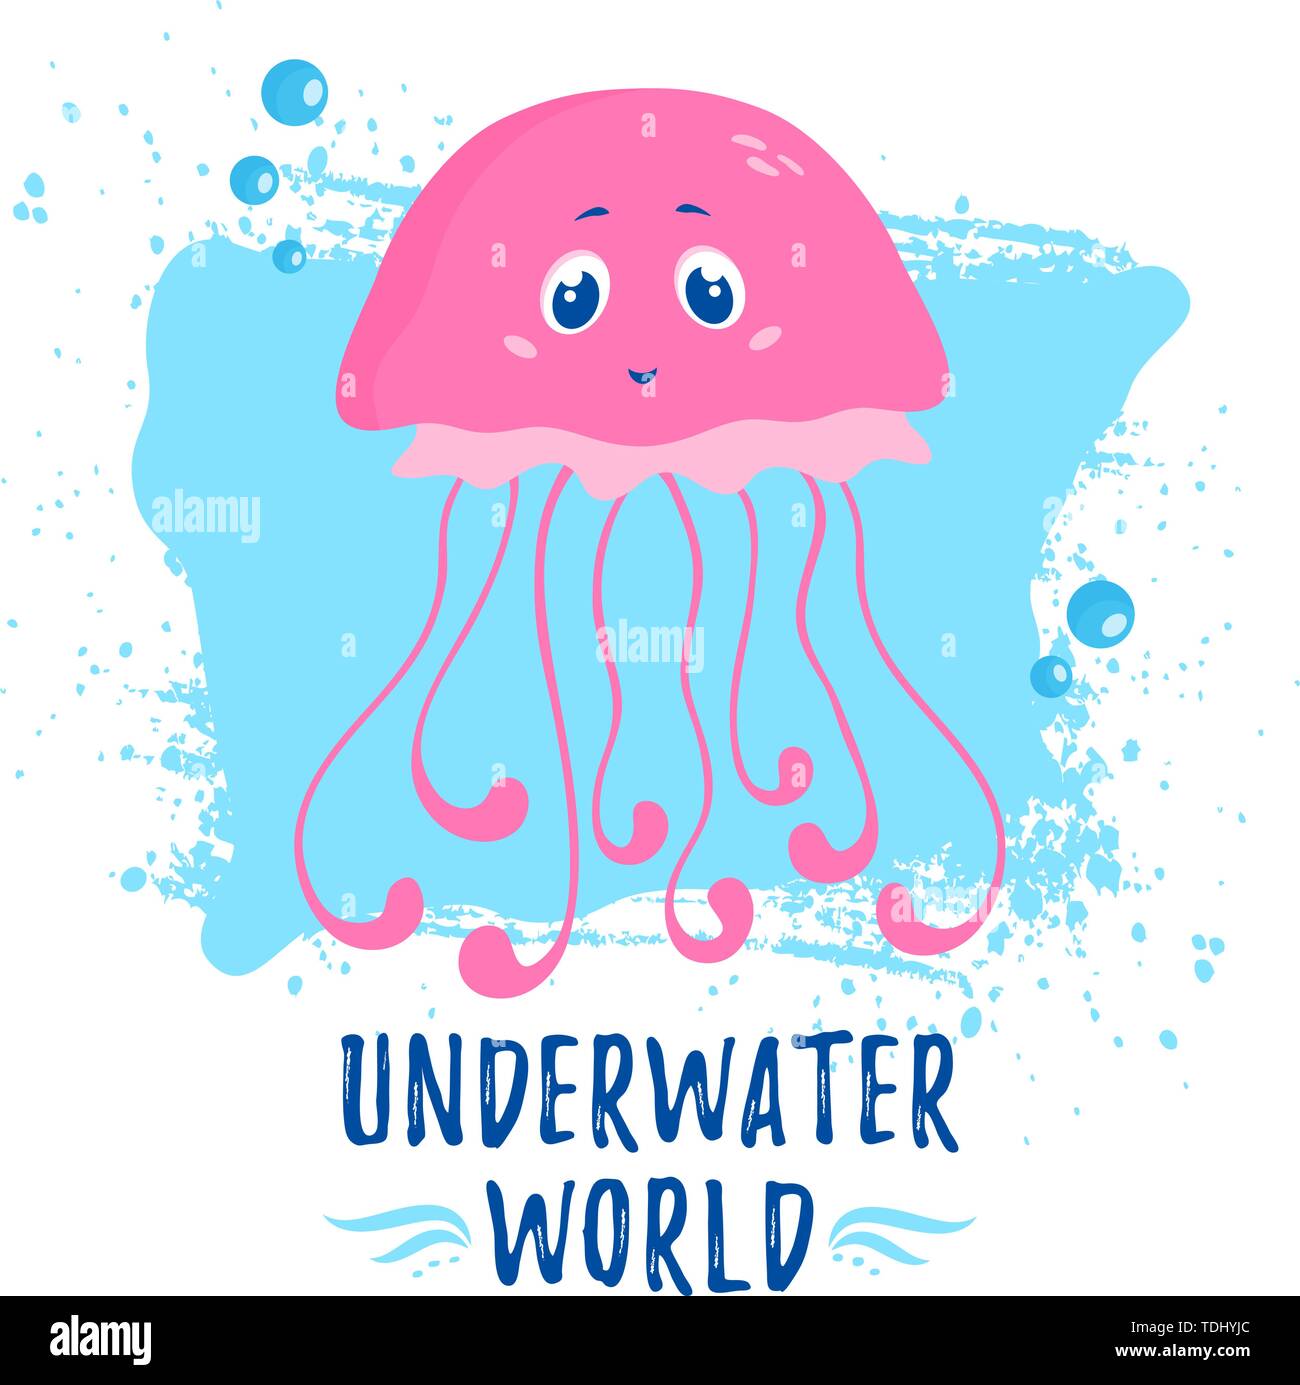 Illustration with cute jellyfish and phrase - Underwater world. Vector print for poster, children wear or other design. Stock Vector